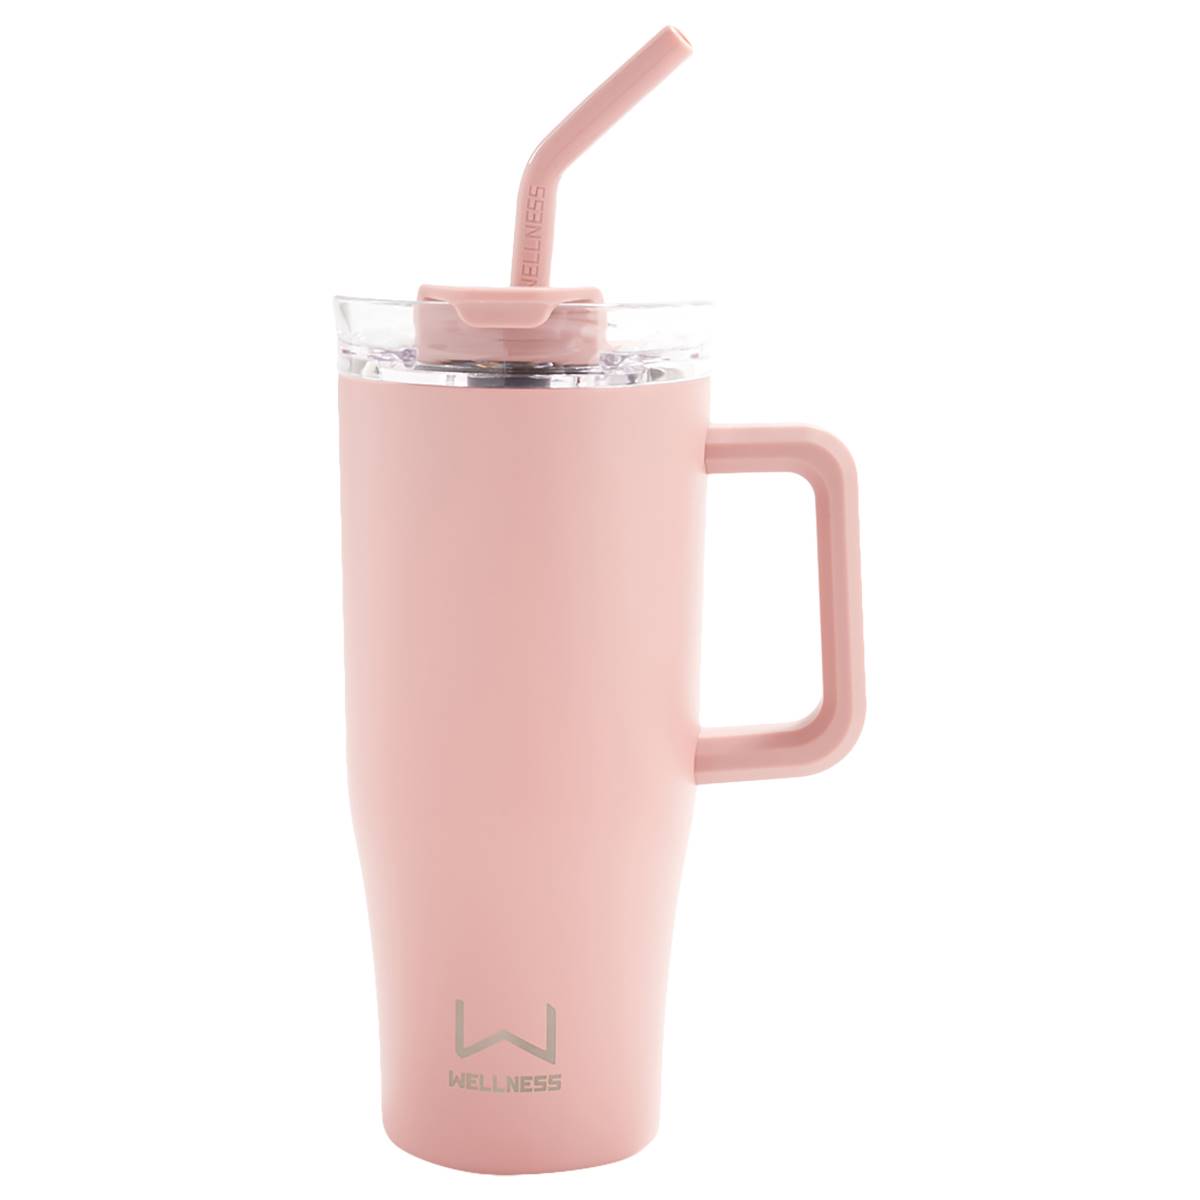 30oz. Double Wall Stainless Steel Tumbler W/ Handle - Light Pink